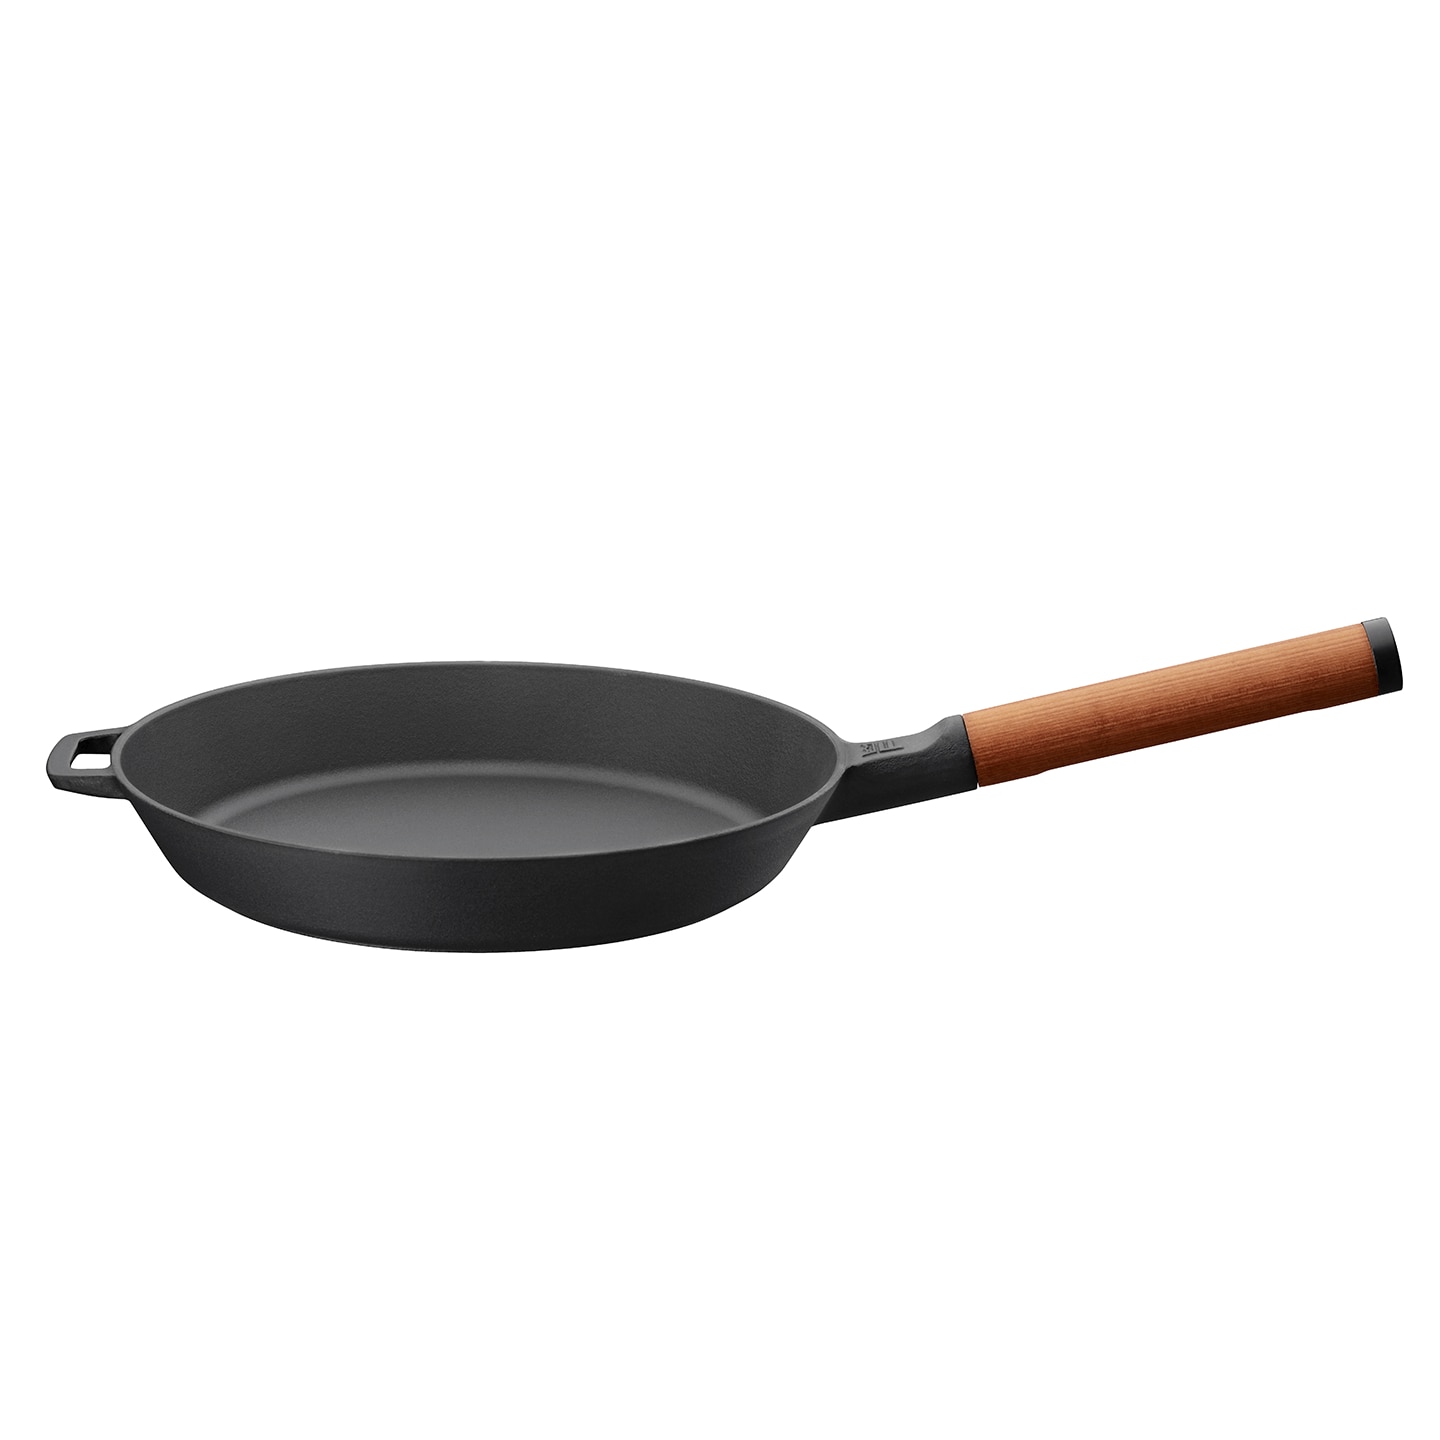  Cast Iron Skillets Lightweight Frying Pans with Detachable  Wooden Handle, Nonstick Pan for Cooking, Stovetop, Induction, 11.8 Inch:  Home & Kitchen